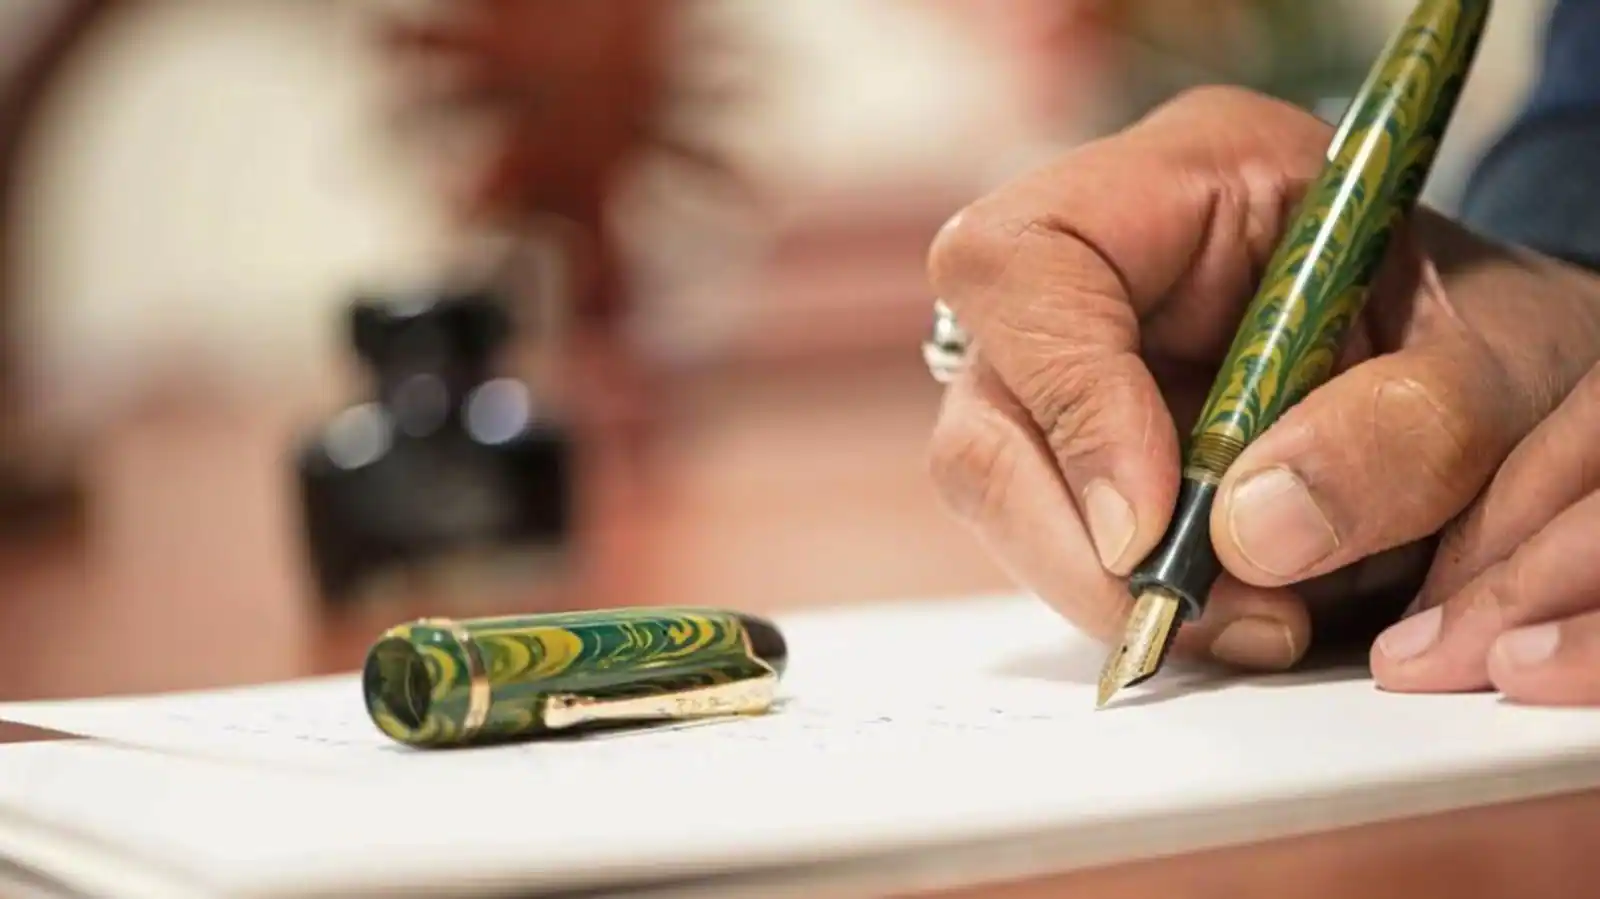 Marker for writing on nearly any surface: All about the uses of universal  pens